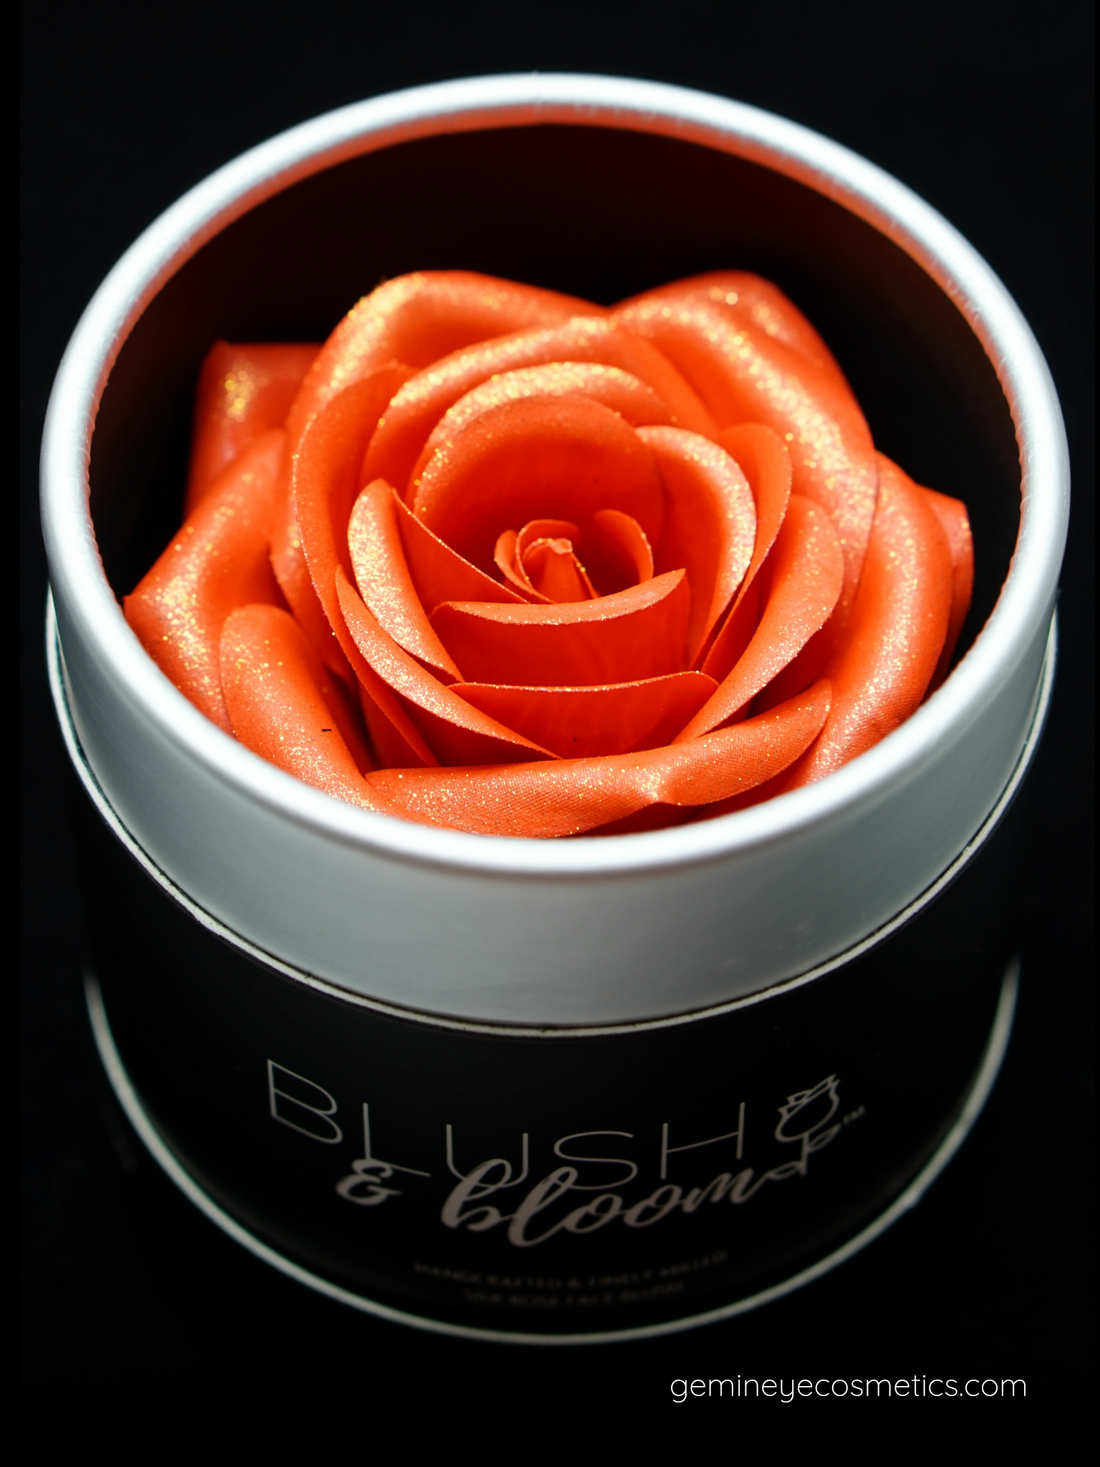 Blush&amp;Bloom™ is an Authentic Scented Rose Blush product designed by GEM IN EYE Cosmetics. This shade is called Fierce in coral orange color. It is highly pigmented and buildable great for light tan to medium brown skin tones. It is a silky powder blush with a matte-to-shimmer finish. It will give you that “Sun-kissed Glow”. These rose blushes were first introduced in the beauty industry in NEW YORK FASHION WEEK September 2022 Edition